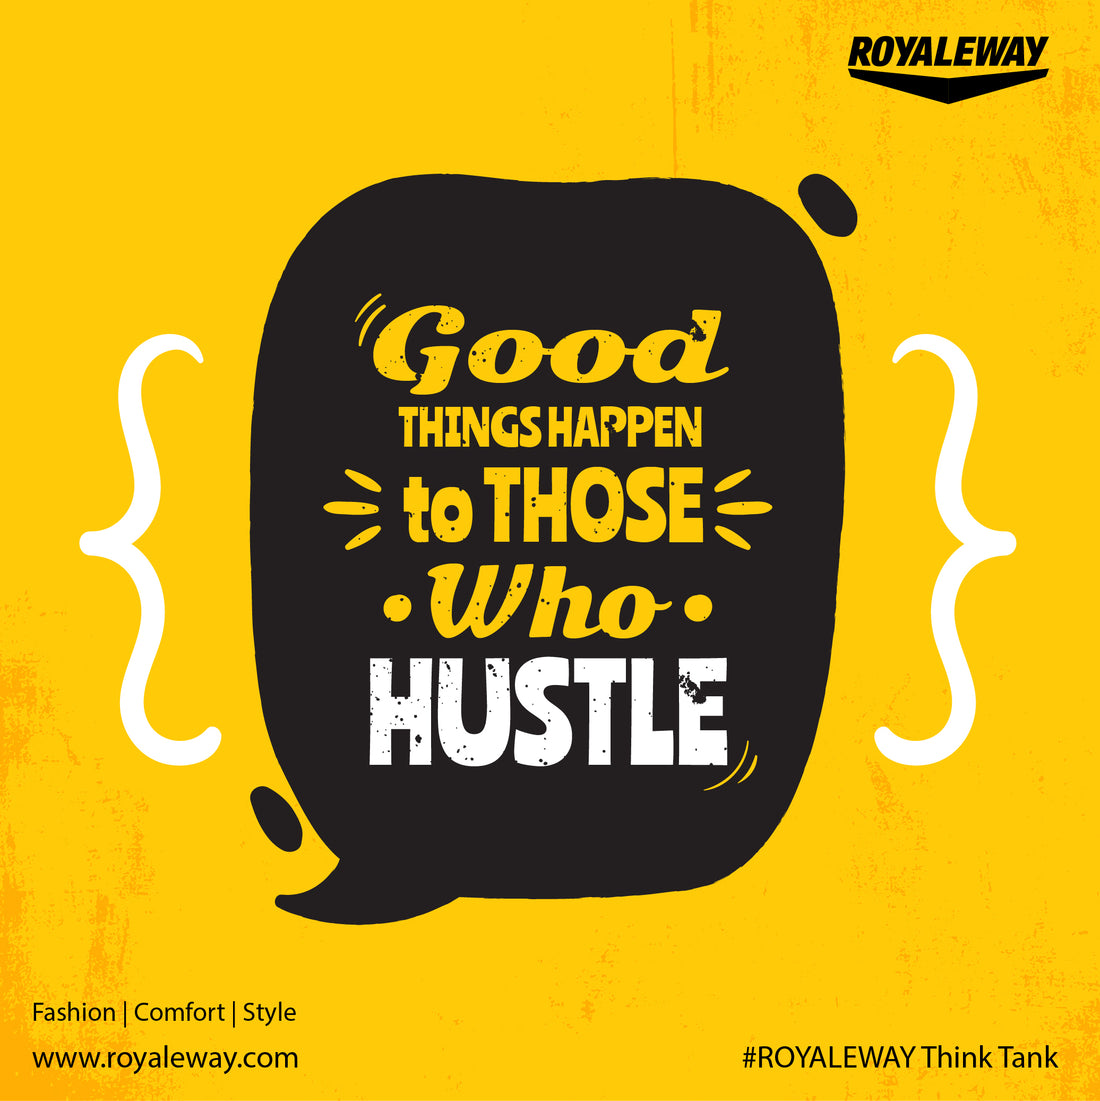 Good Things happen to those who Hustle. ROYALEWAY Think Tank.